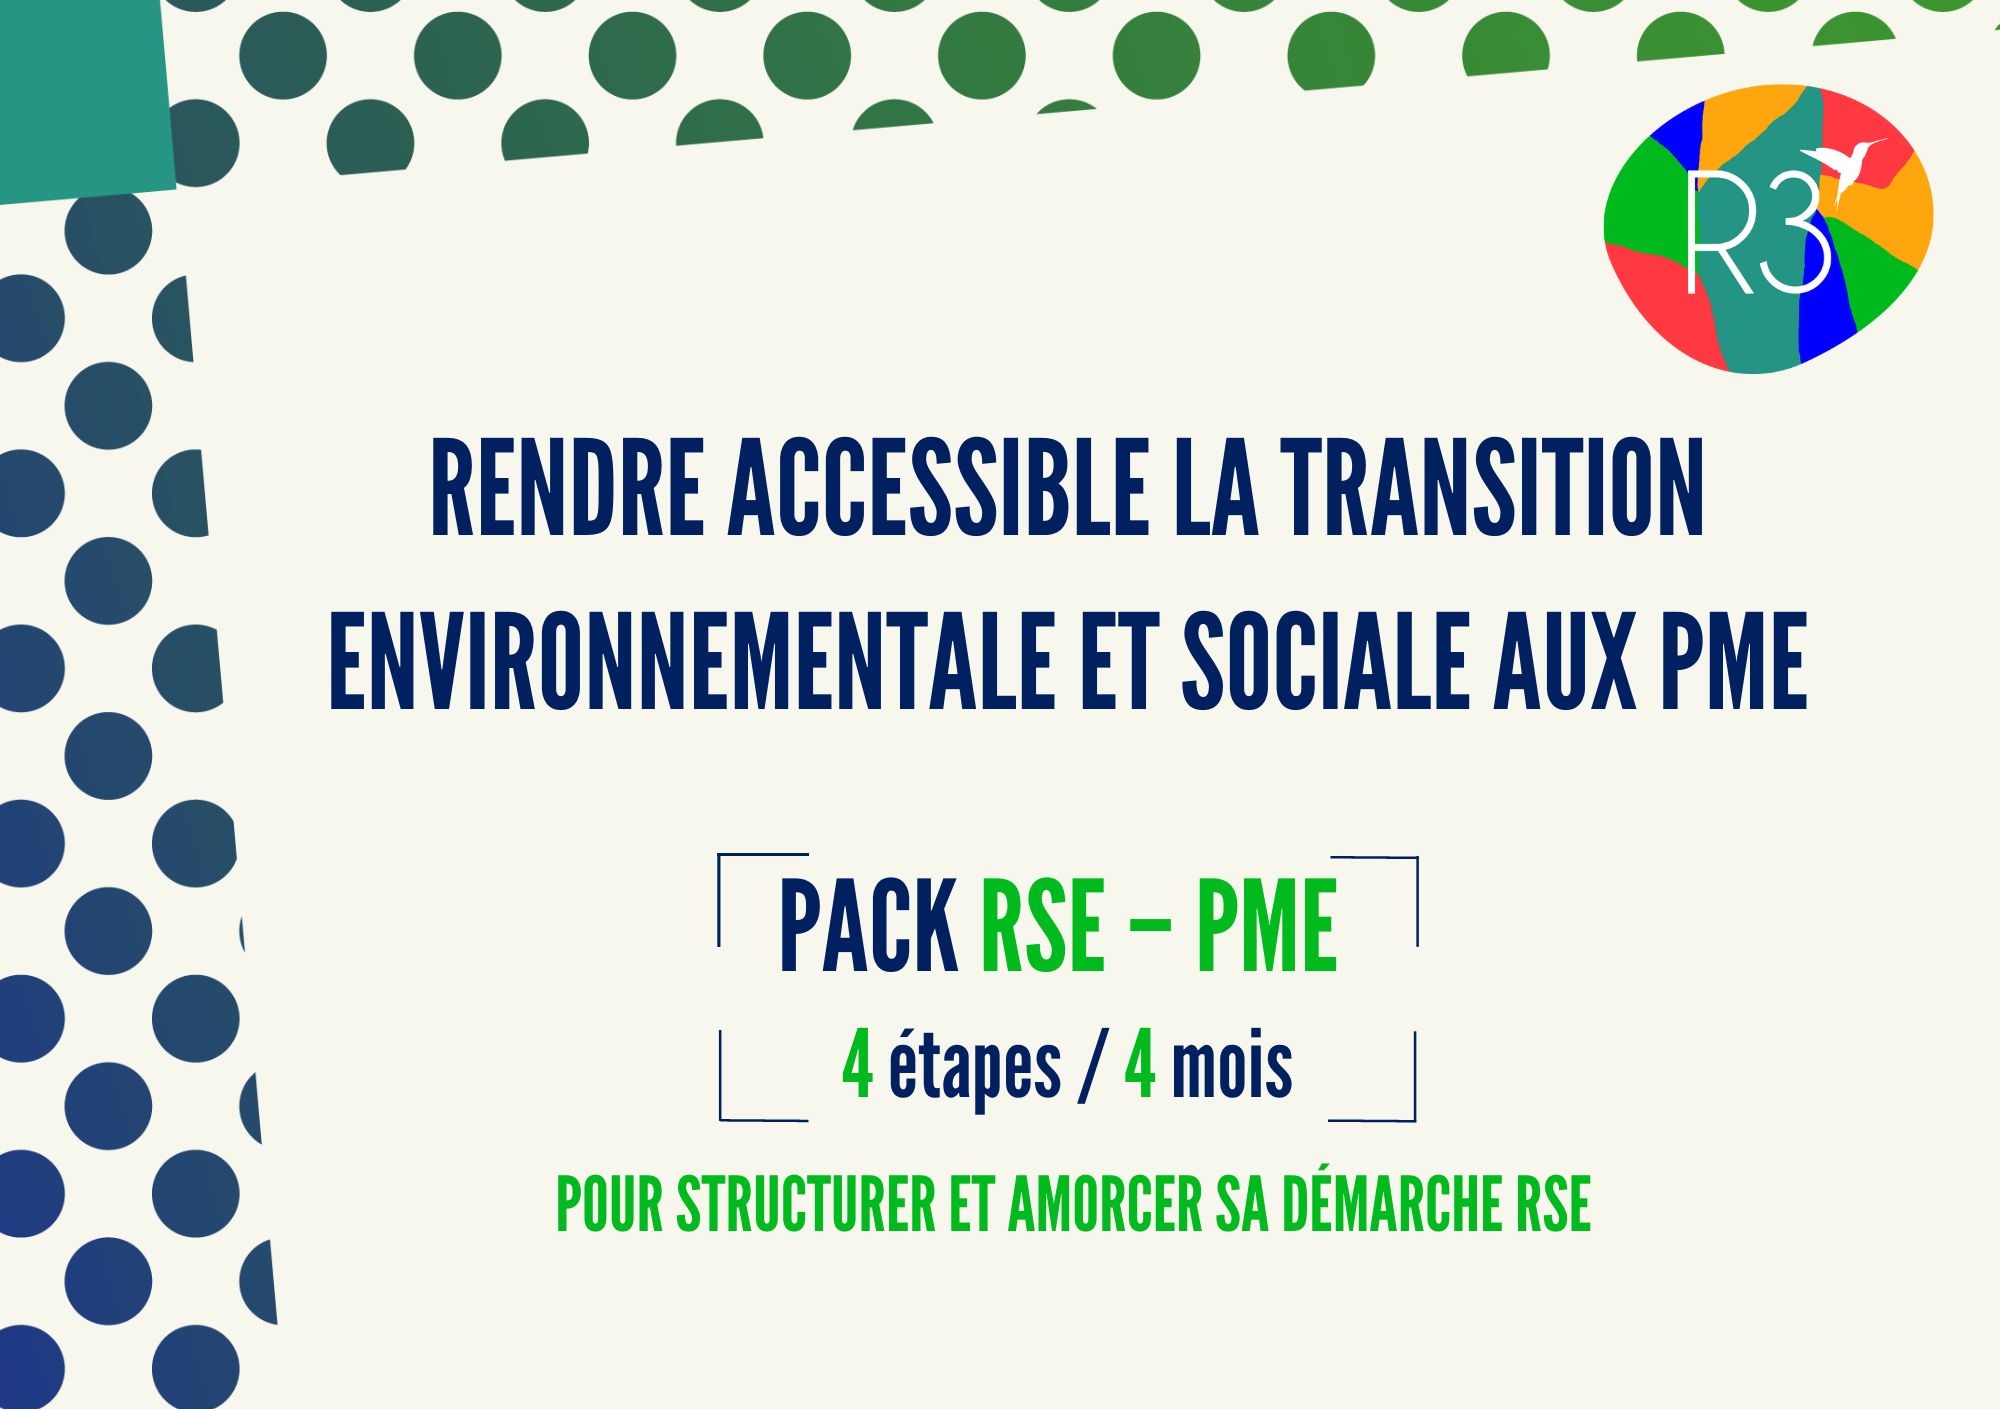 image ressource : Pack RSE-PME